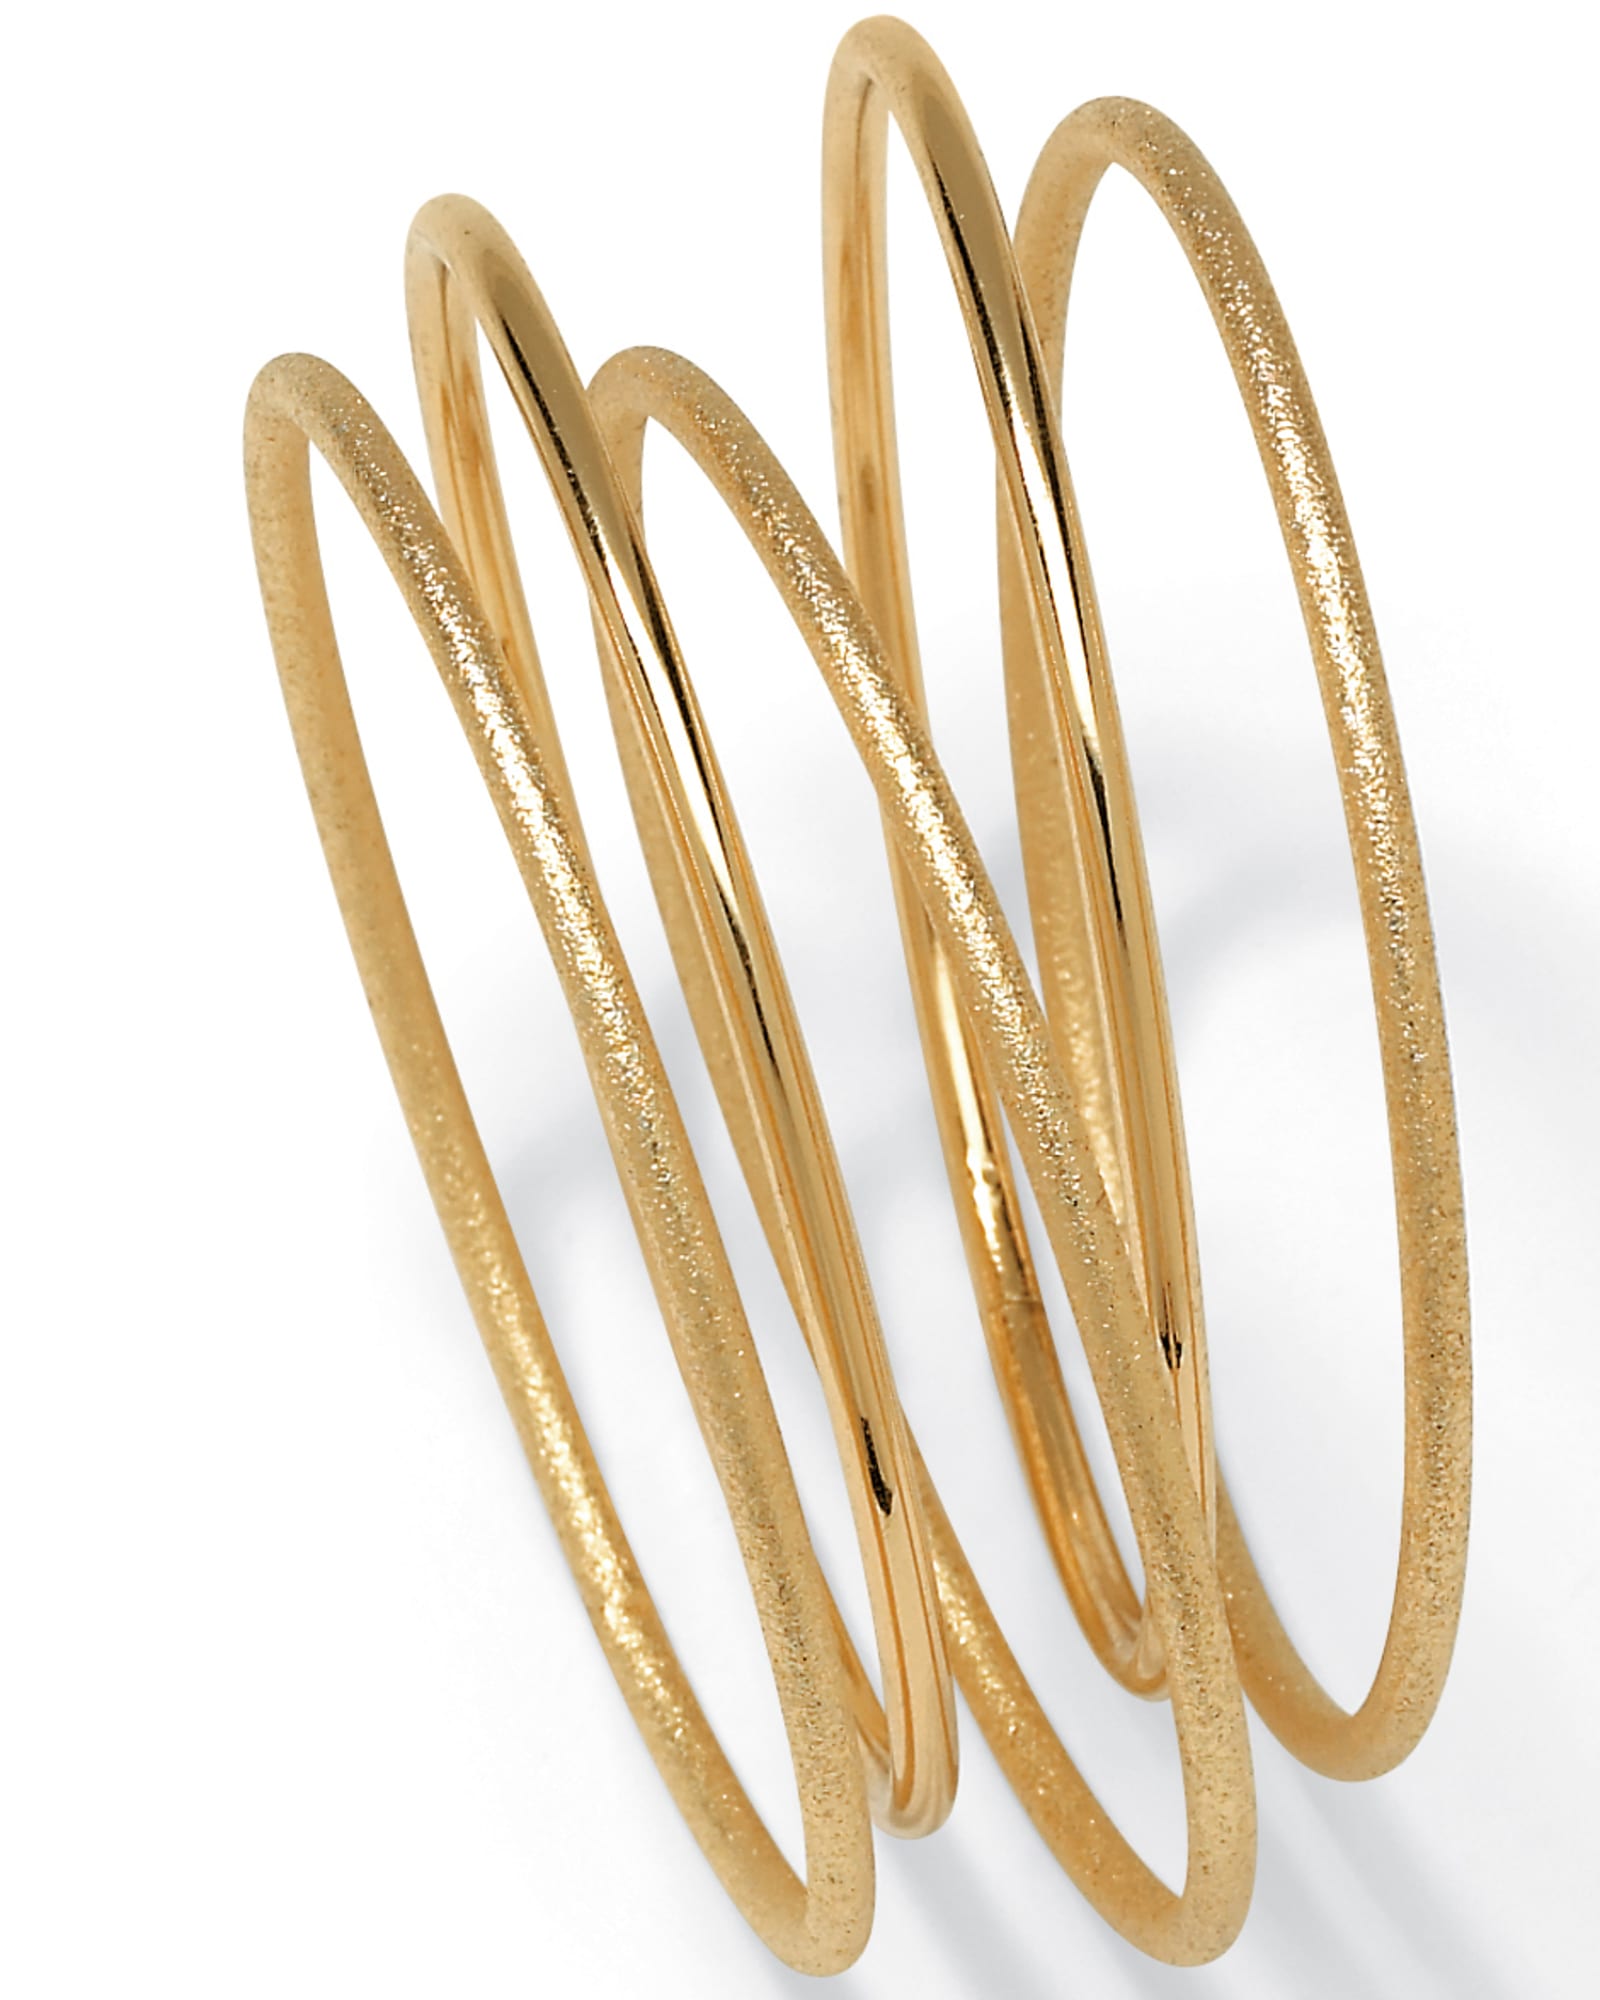 5 Piece Bangle Bracelet Set in Textured and Polished Yellow Goldtone | Yellow